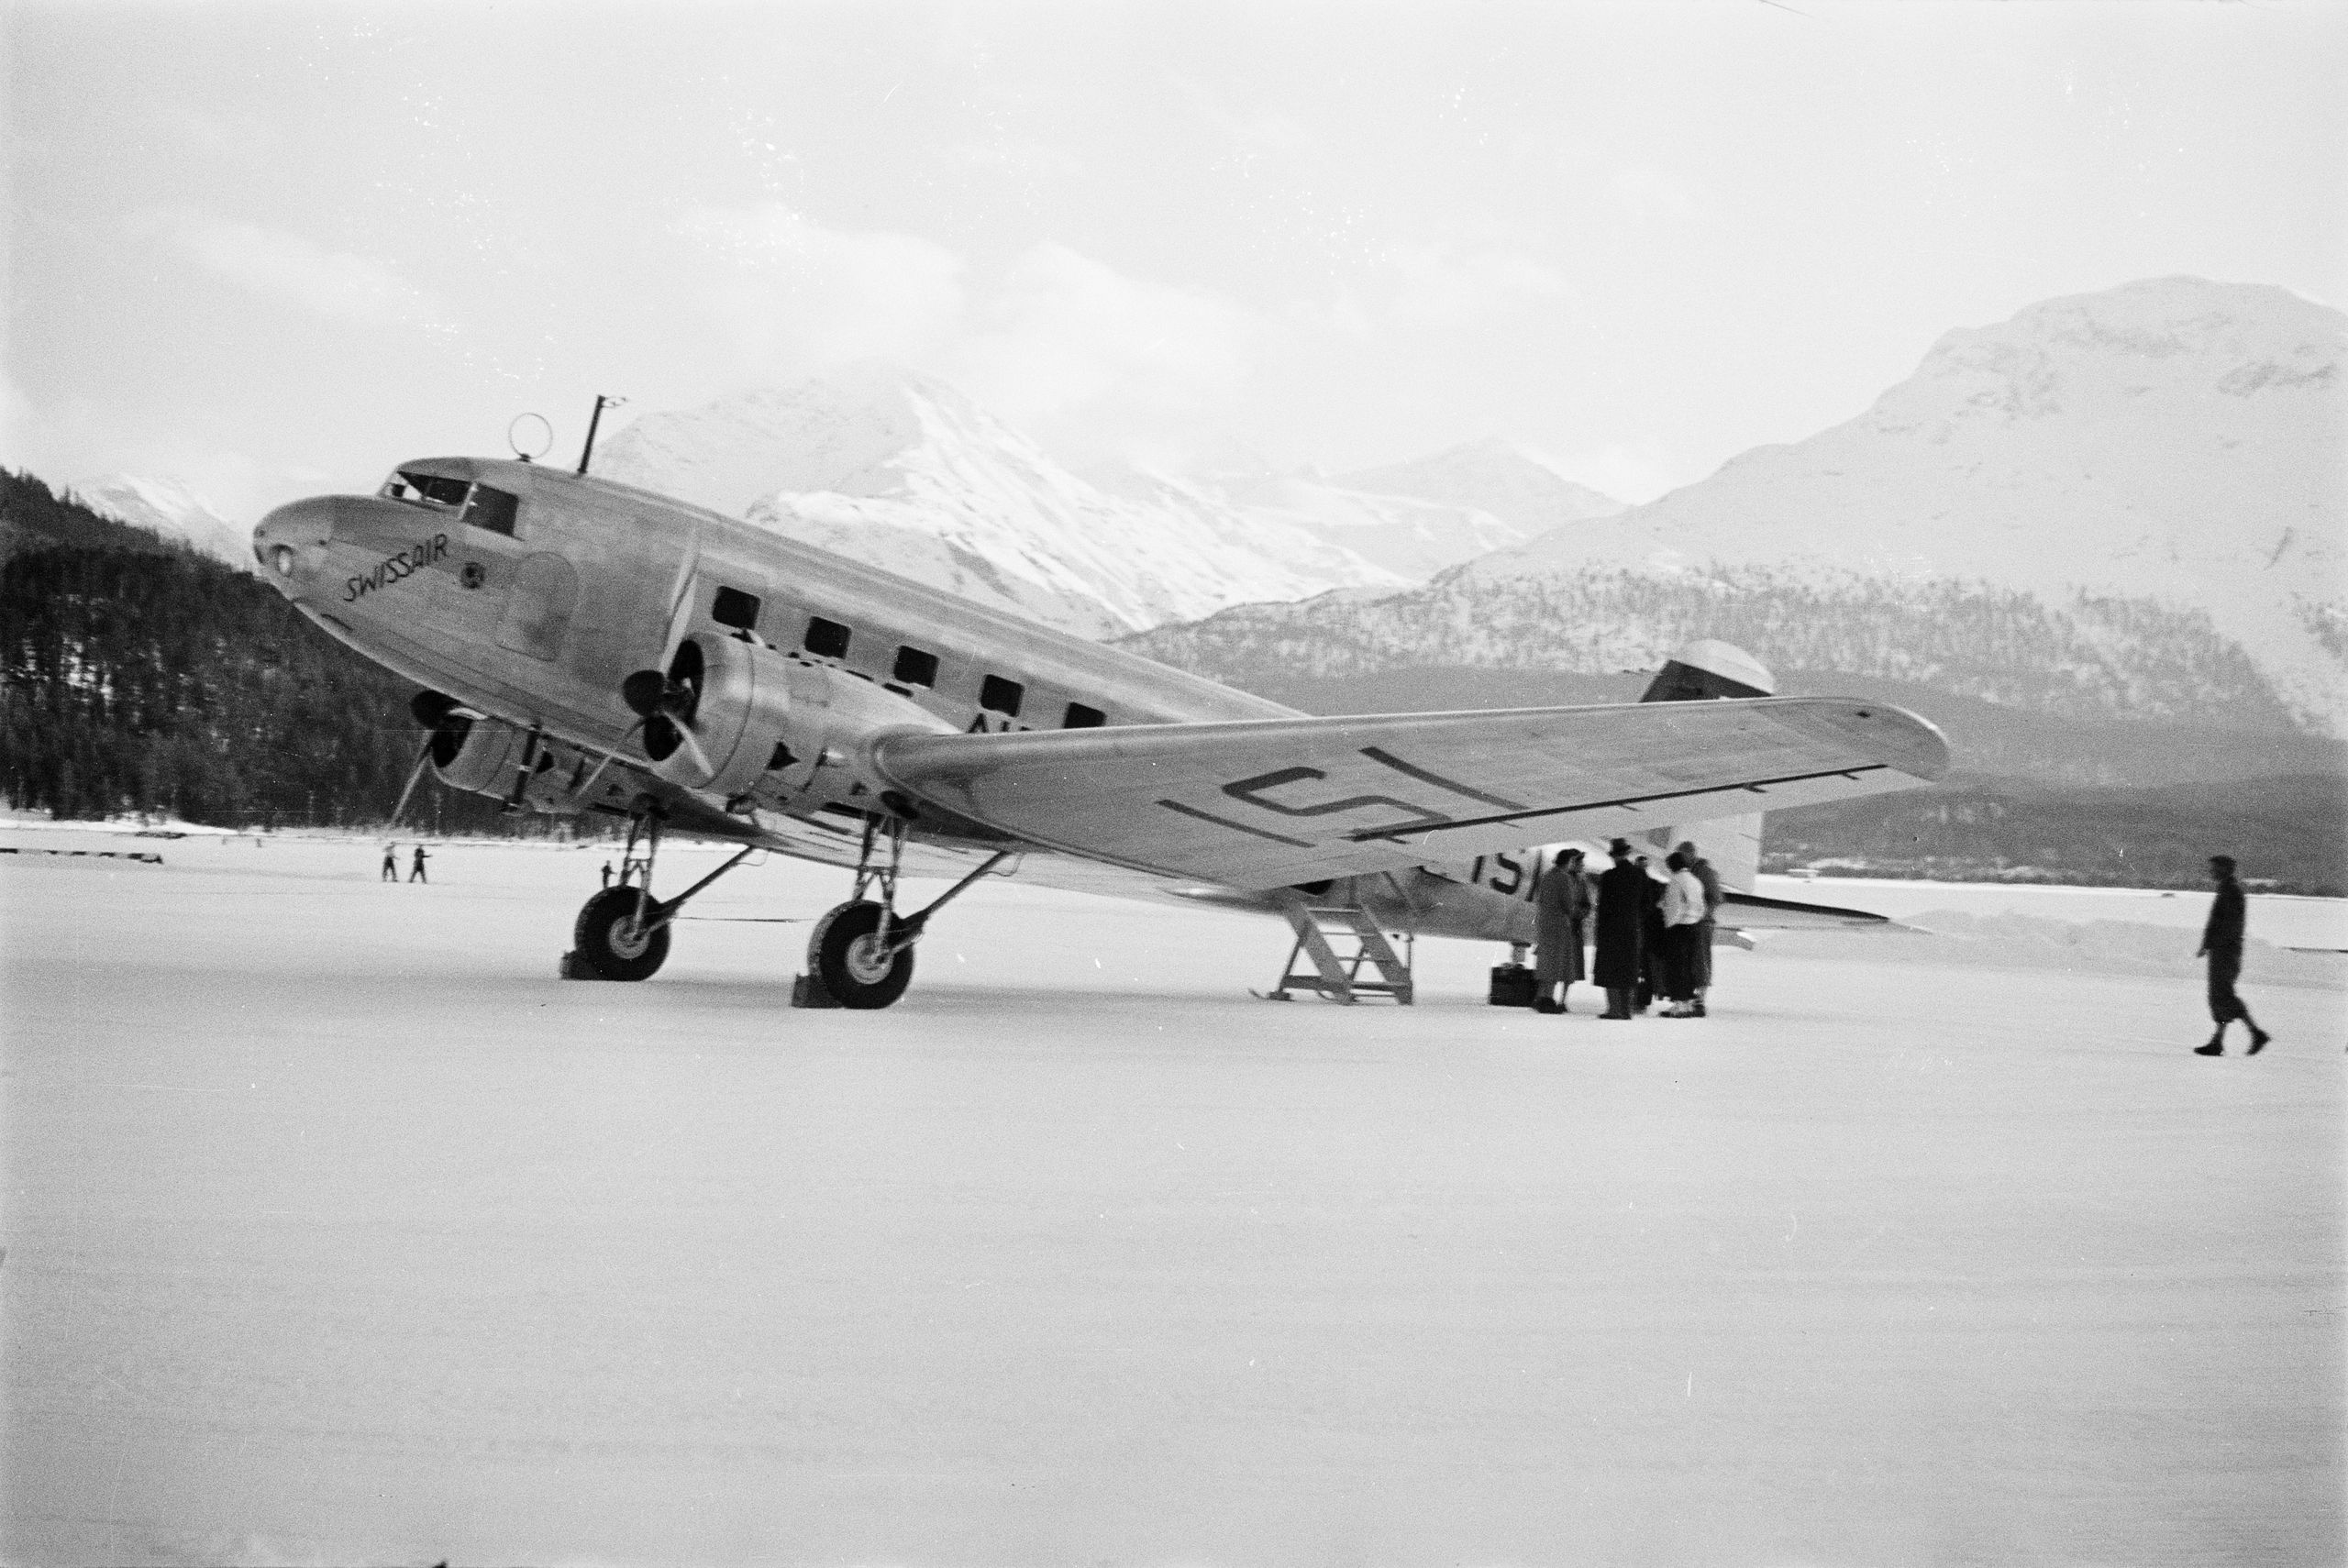 A Swissair Douglas DC-2-115-D photographed between 1937 and 1938.